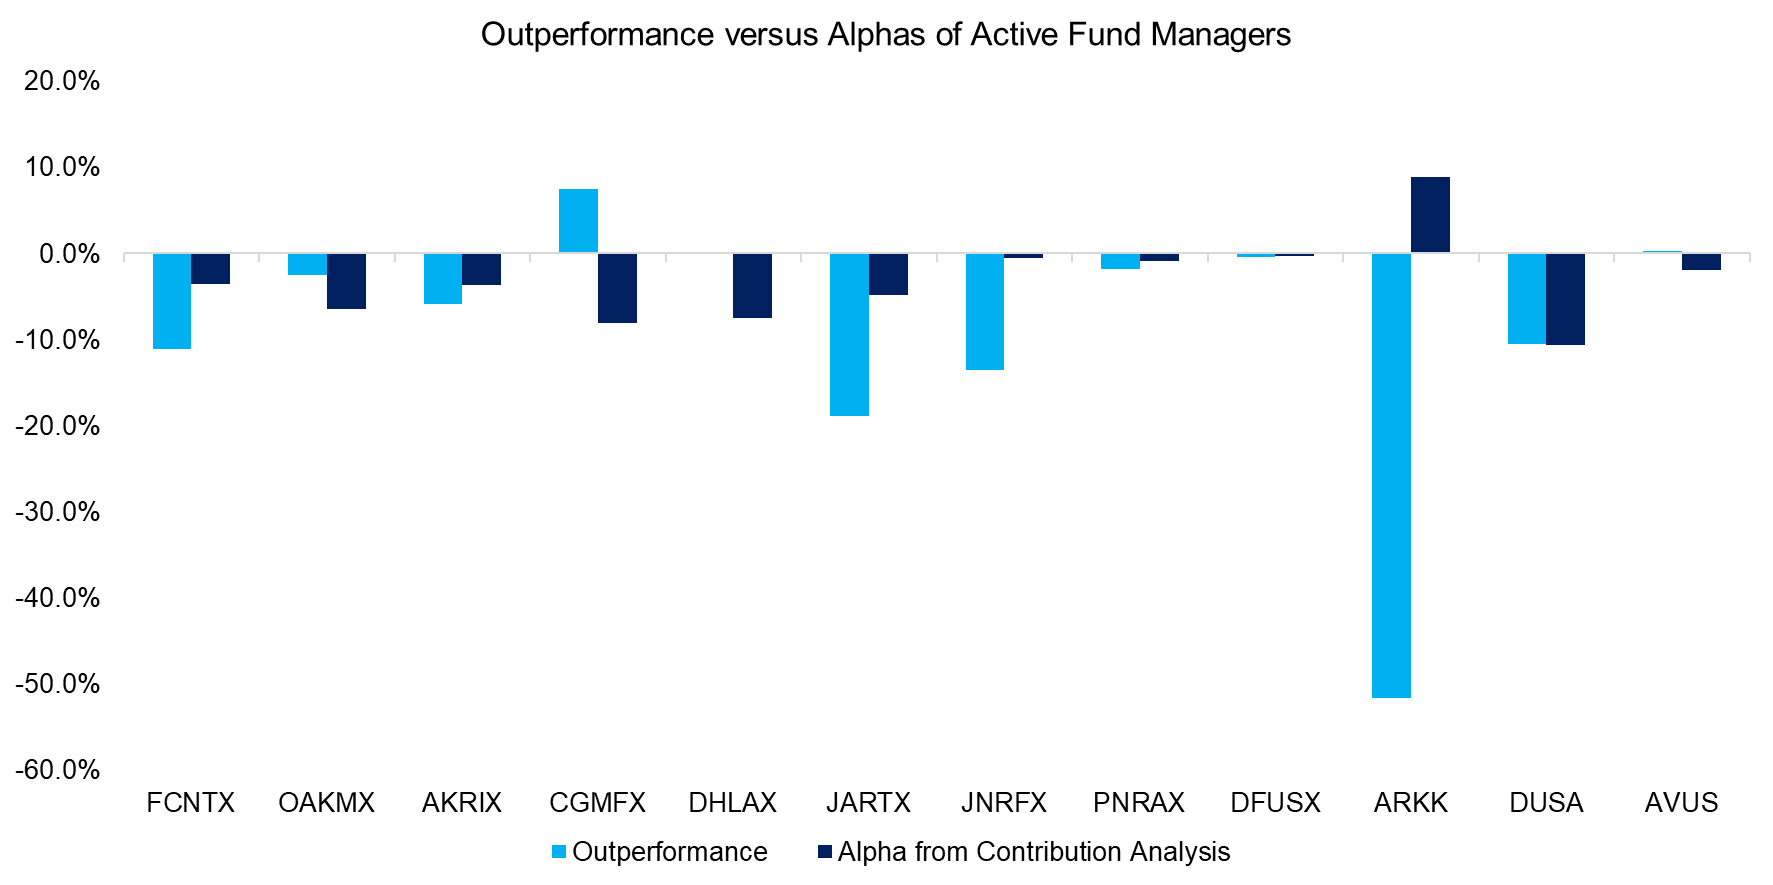 Outperformance versus Alphas of Active Fund Managers